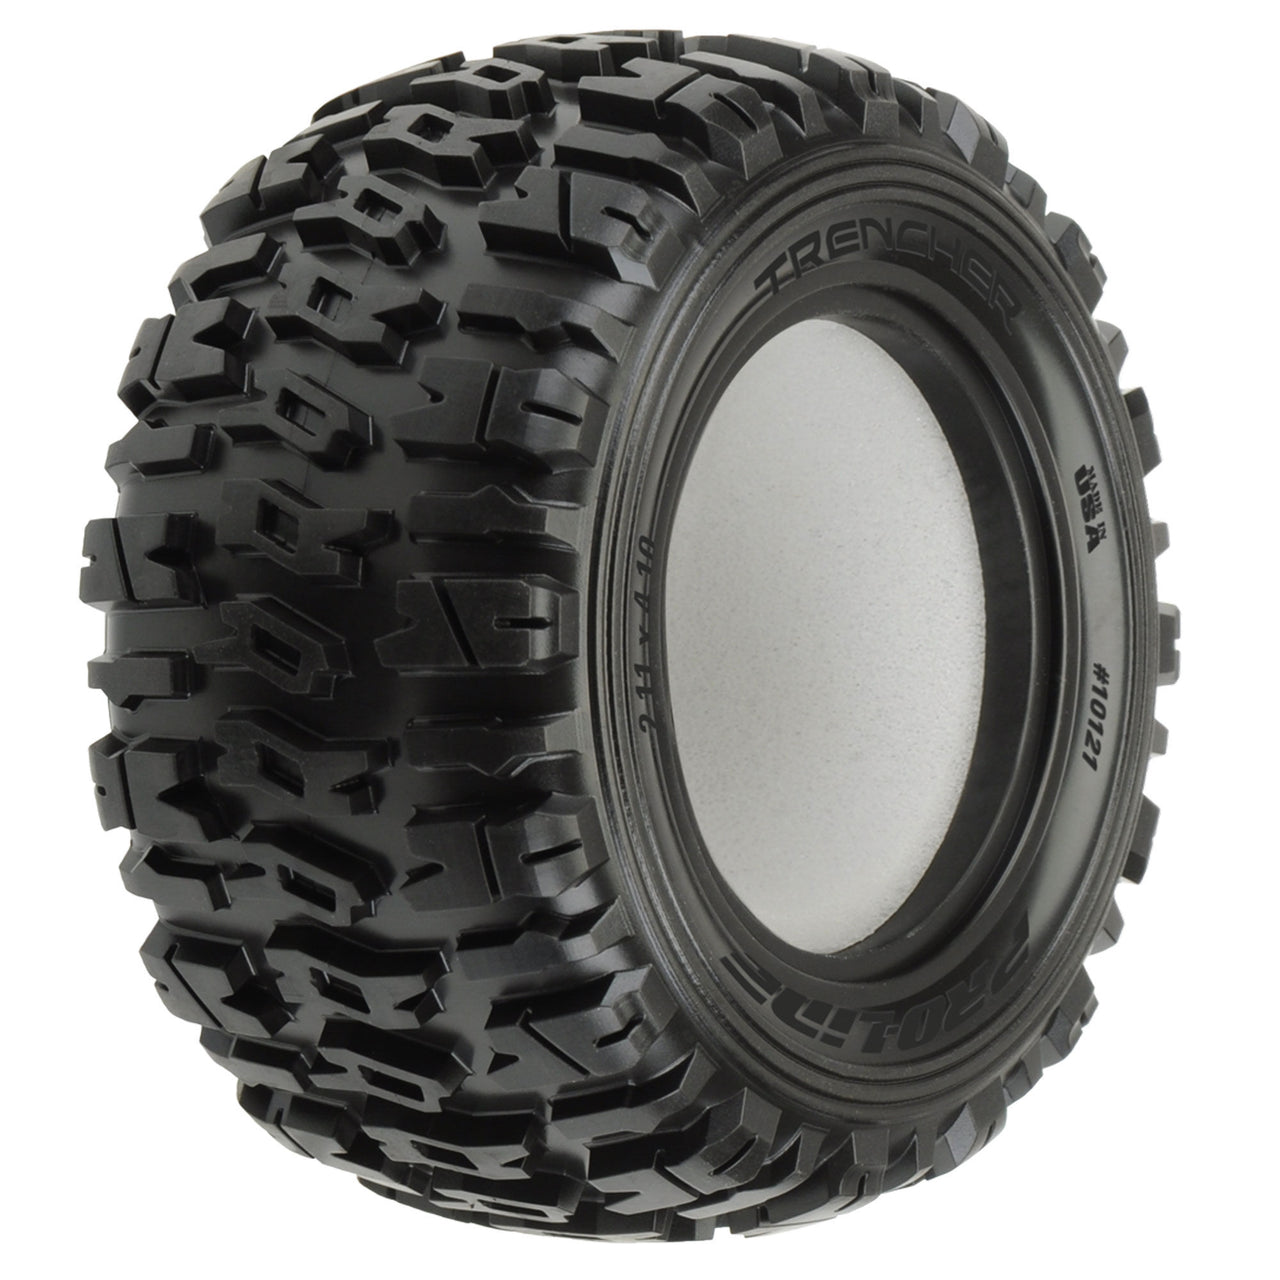 PRO1012100 1/10 Trencher T Front/Rear 2.2" All Terrain Stadium Truck Tires (2)